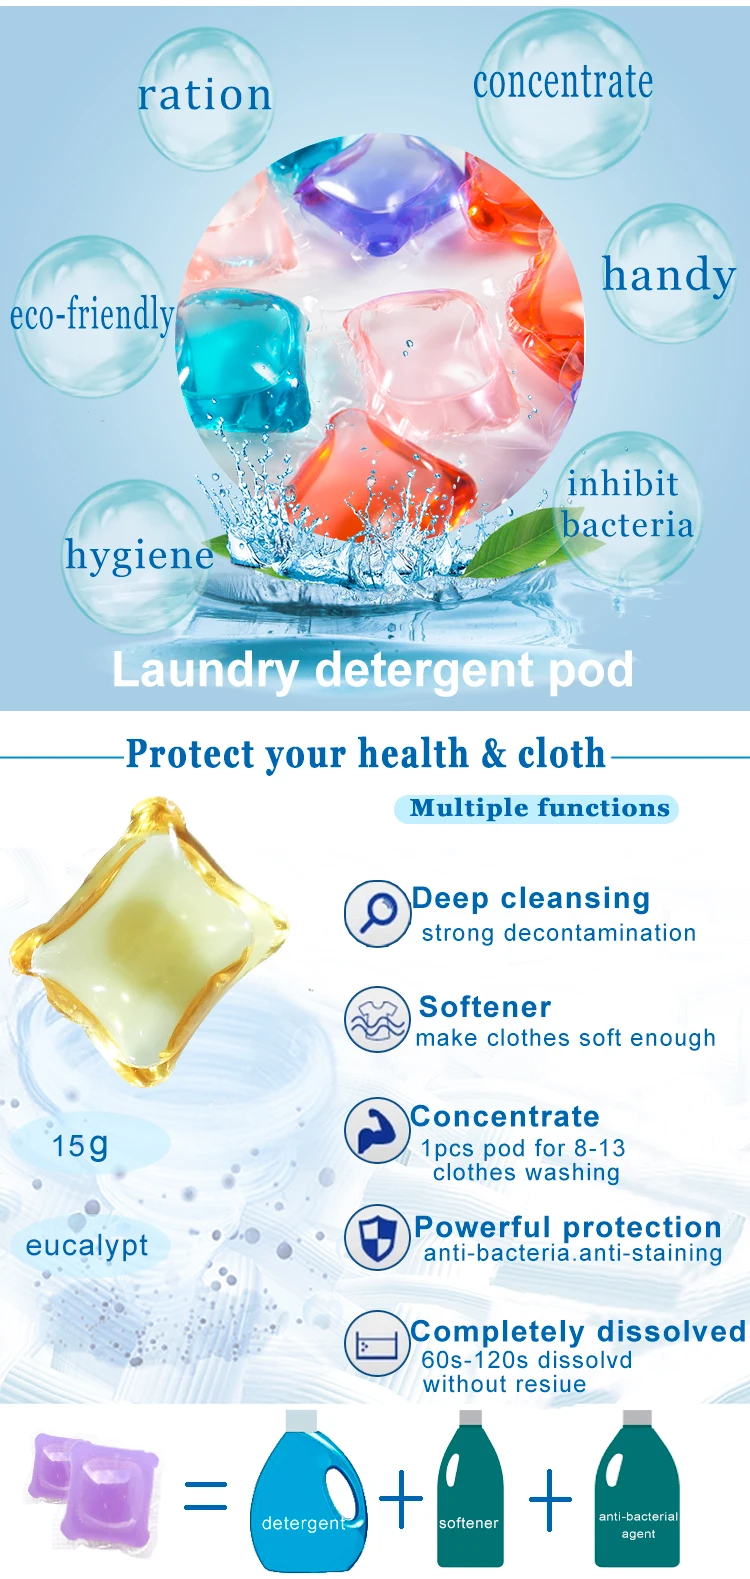 Condensate Liquid Detergent Beads 4 in 1 pods washing for clothes washing labels for laundary detergent